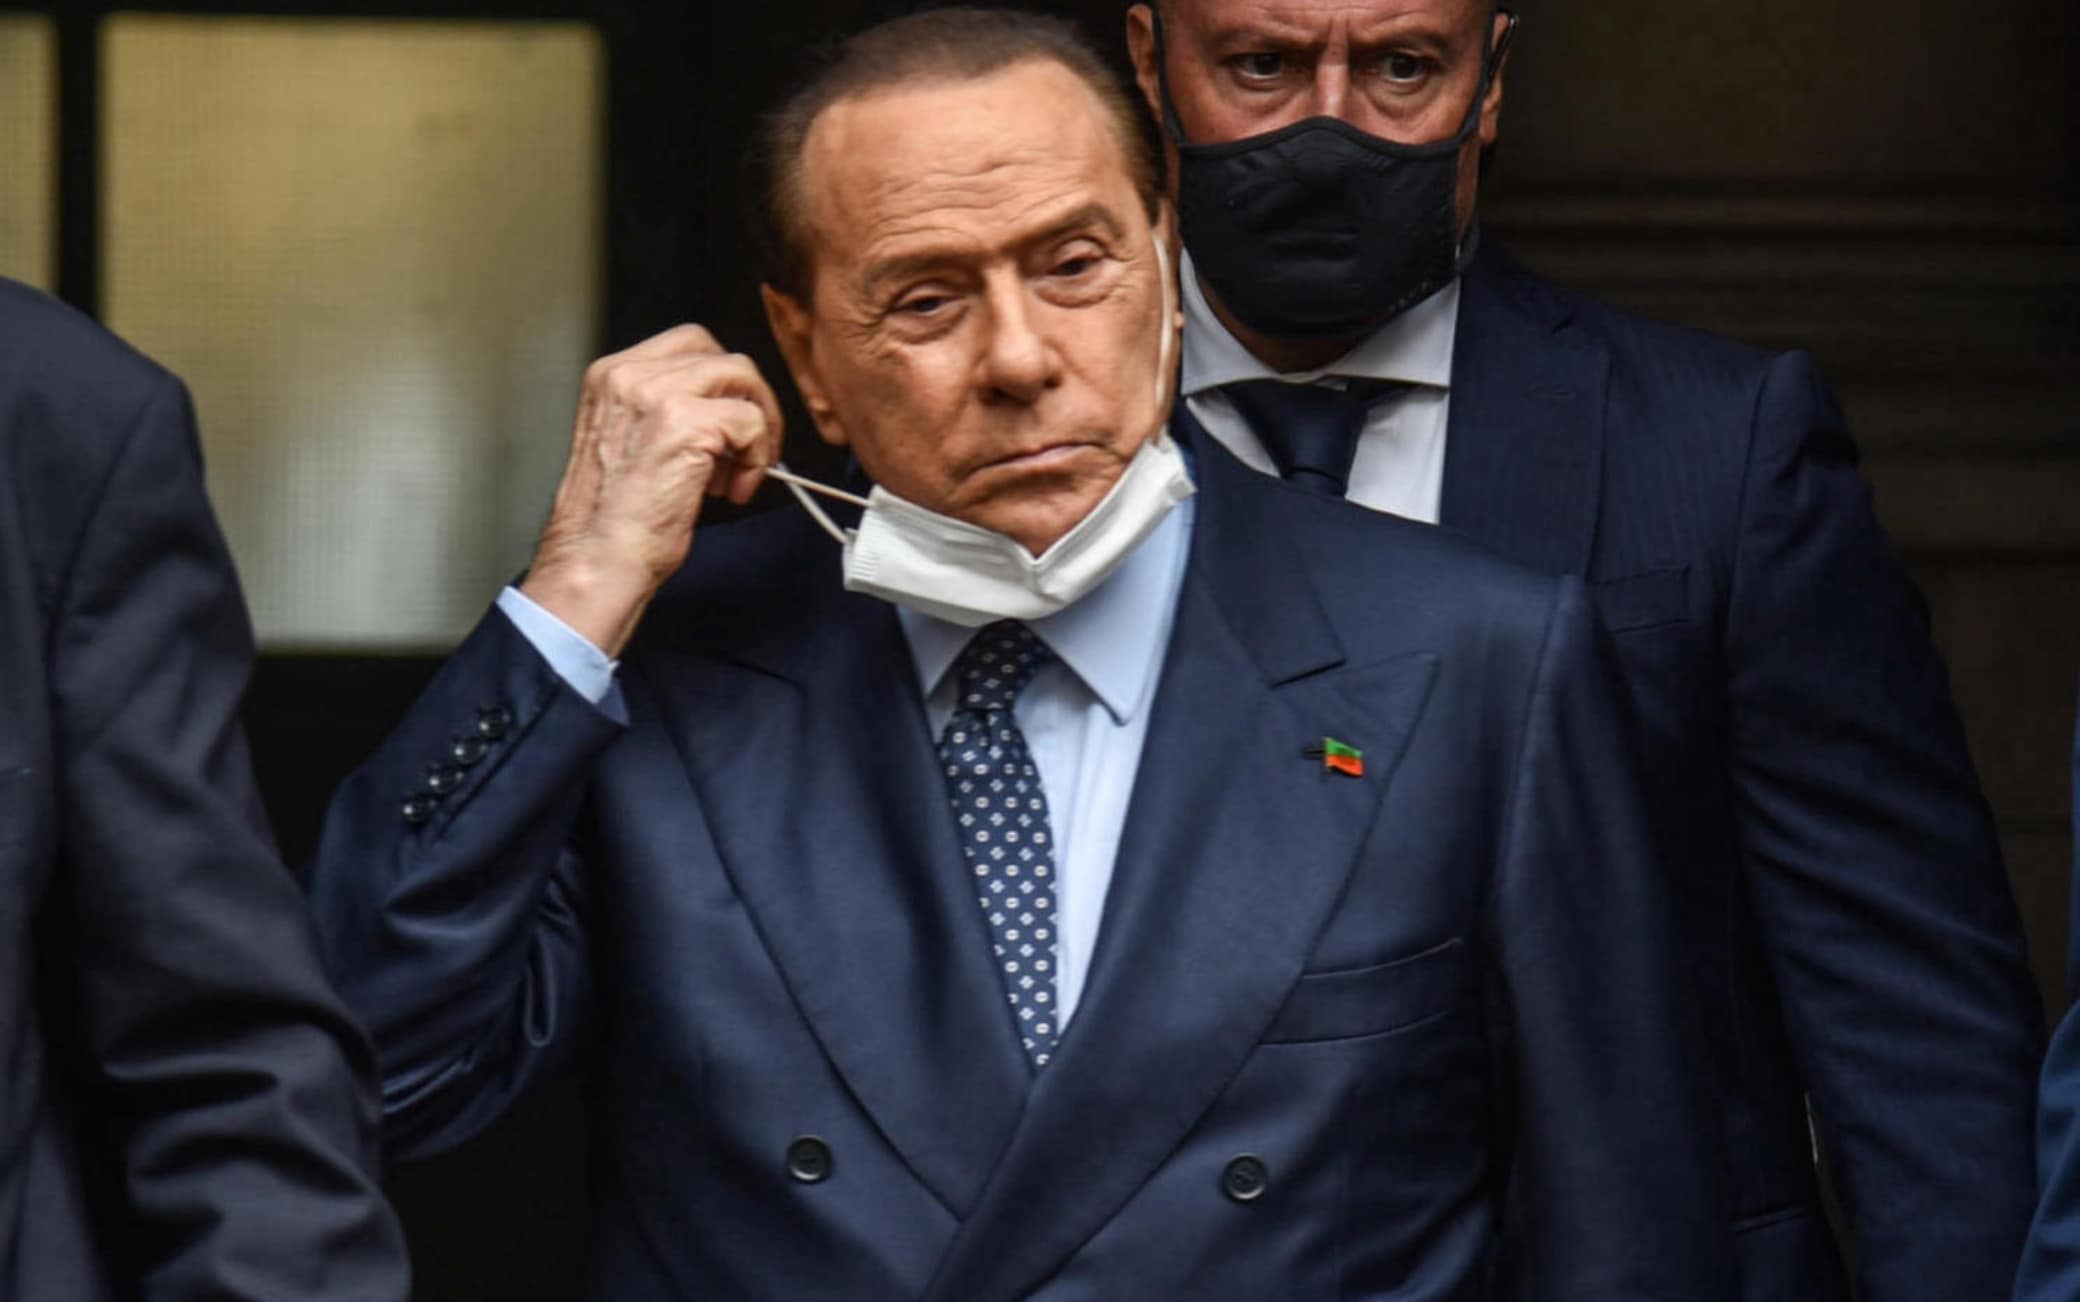 Berlusconi: “Draghi remains prime minister, center-right united in the 2023 elections”